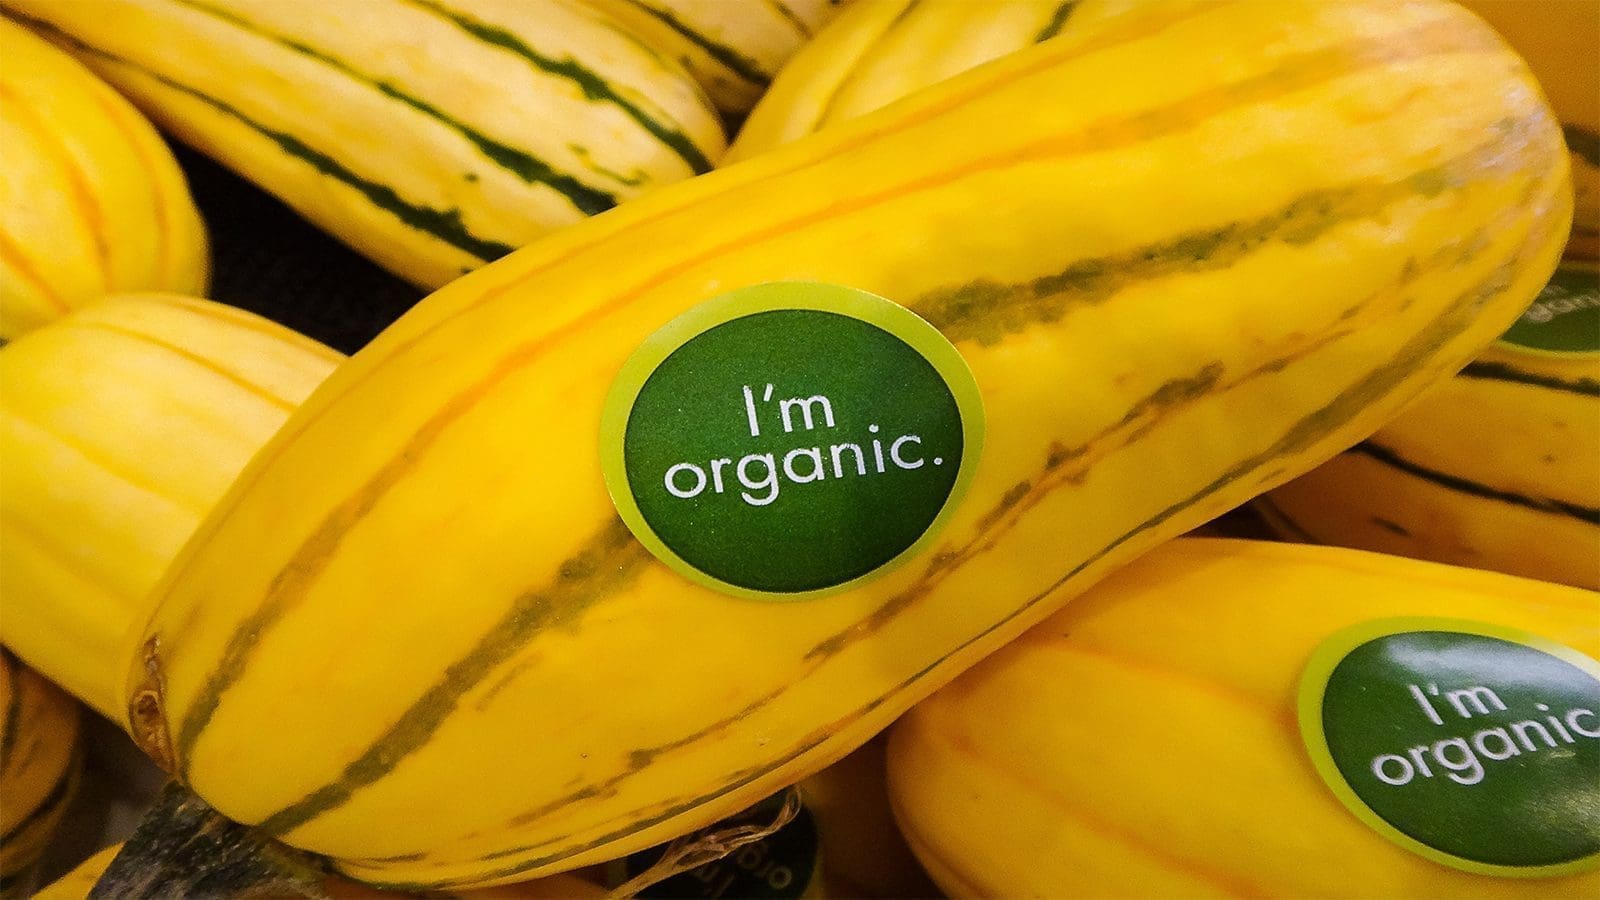 USDA amends National List of Allowed and Prohibited Substances for organic foods